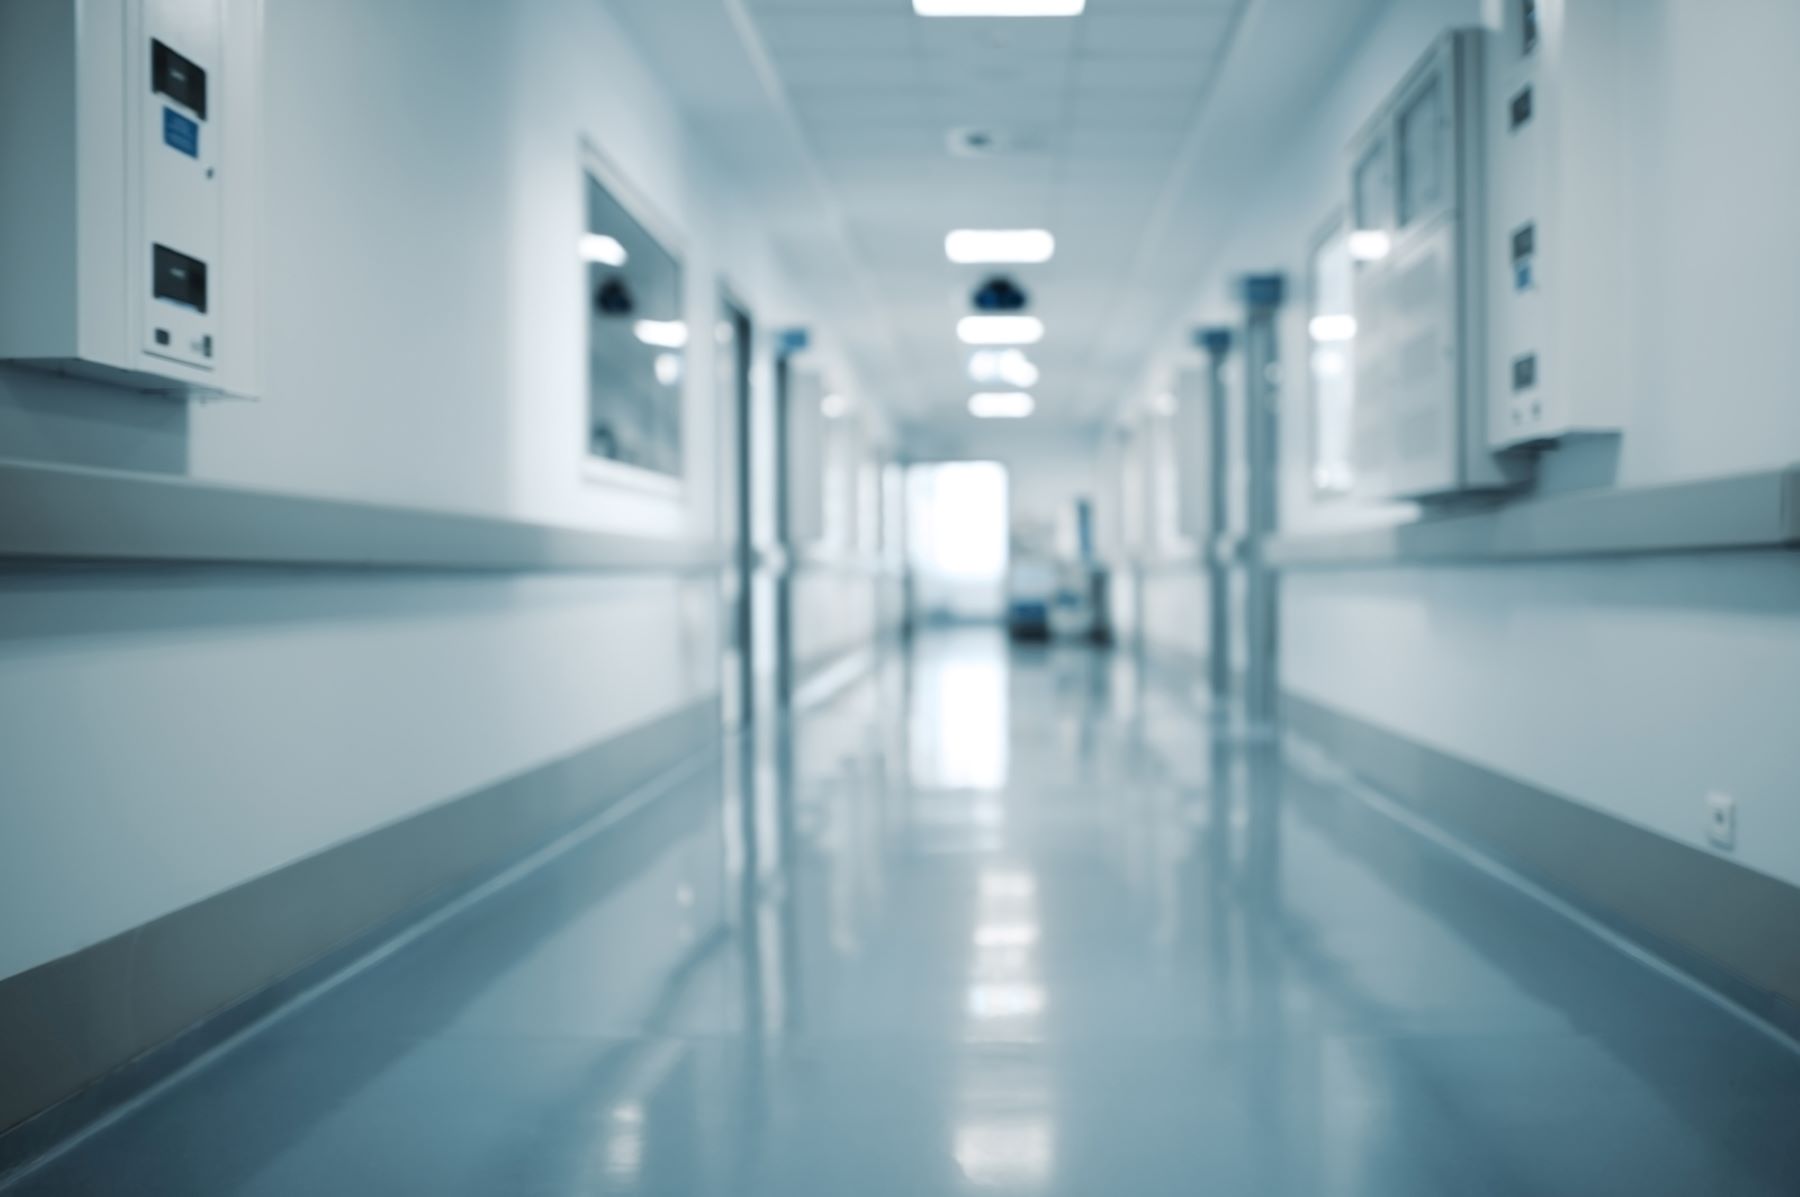 A blurry perspective of a hospital corridor with clinical blue tones and a figure in the distance.